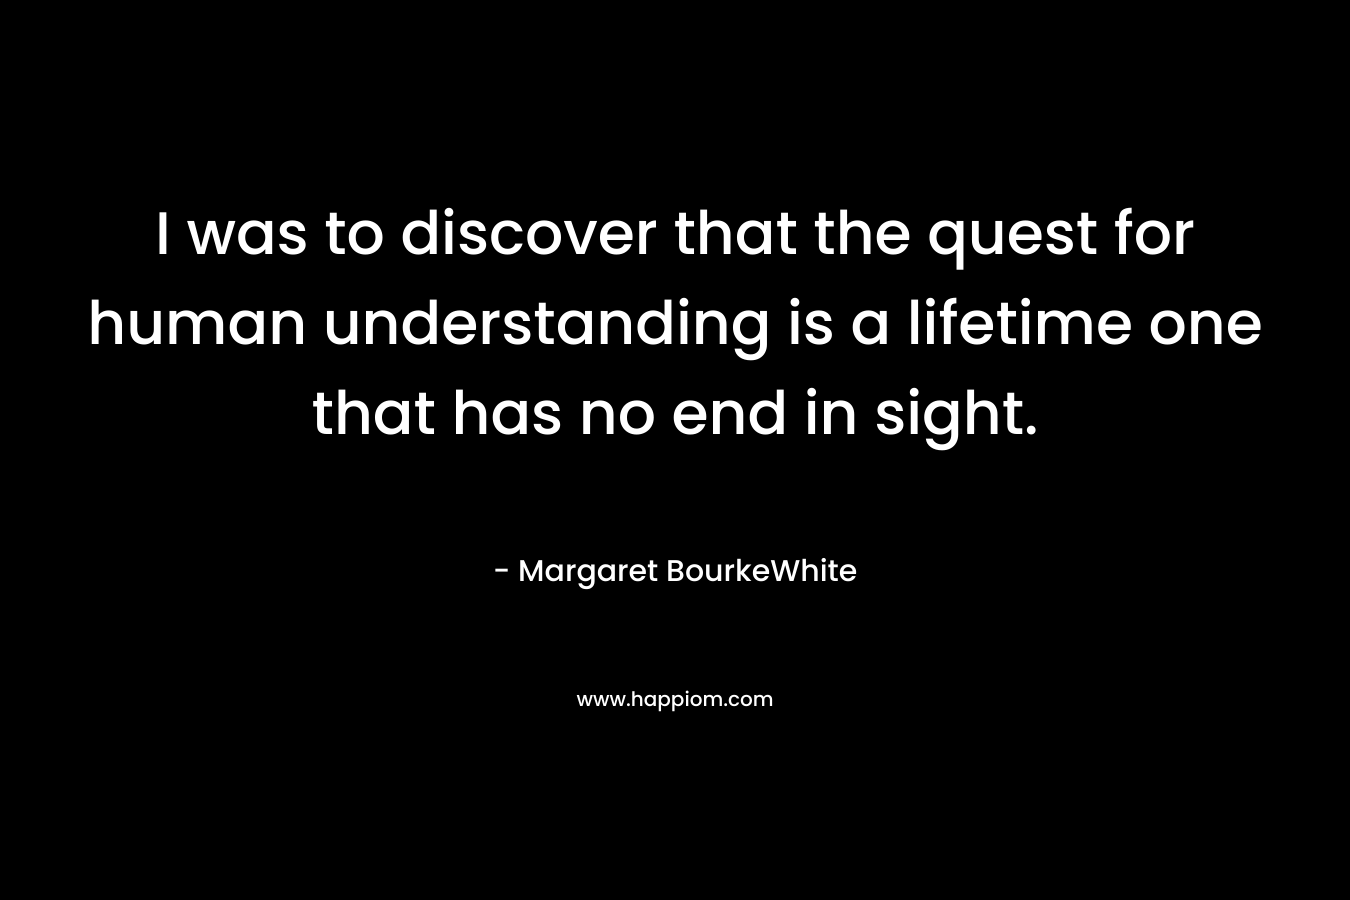 I was to discover that the quest for human understanding is a lifetime one that has no end in sight.